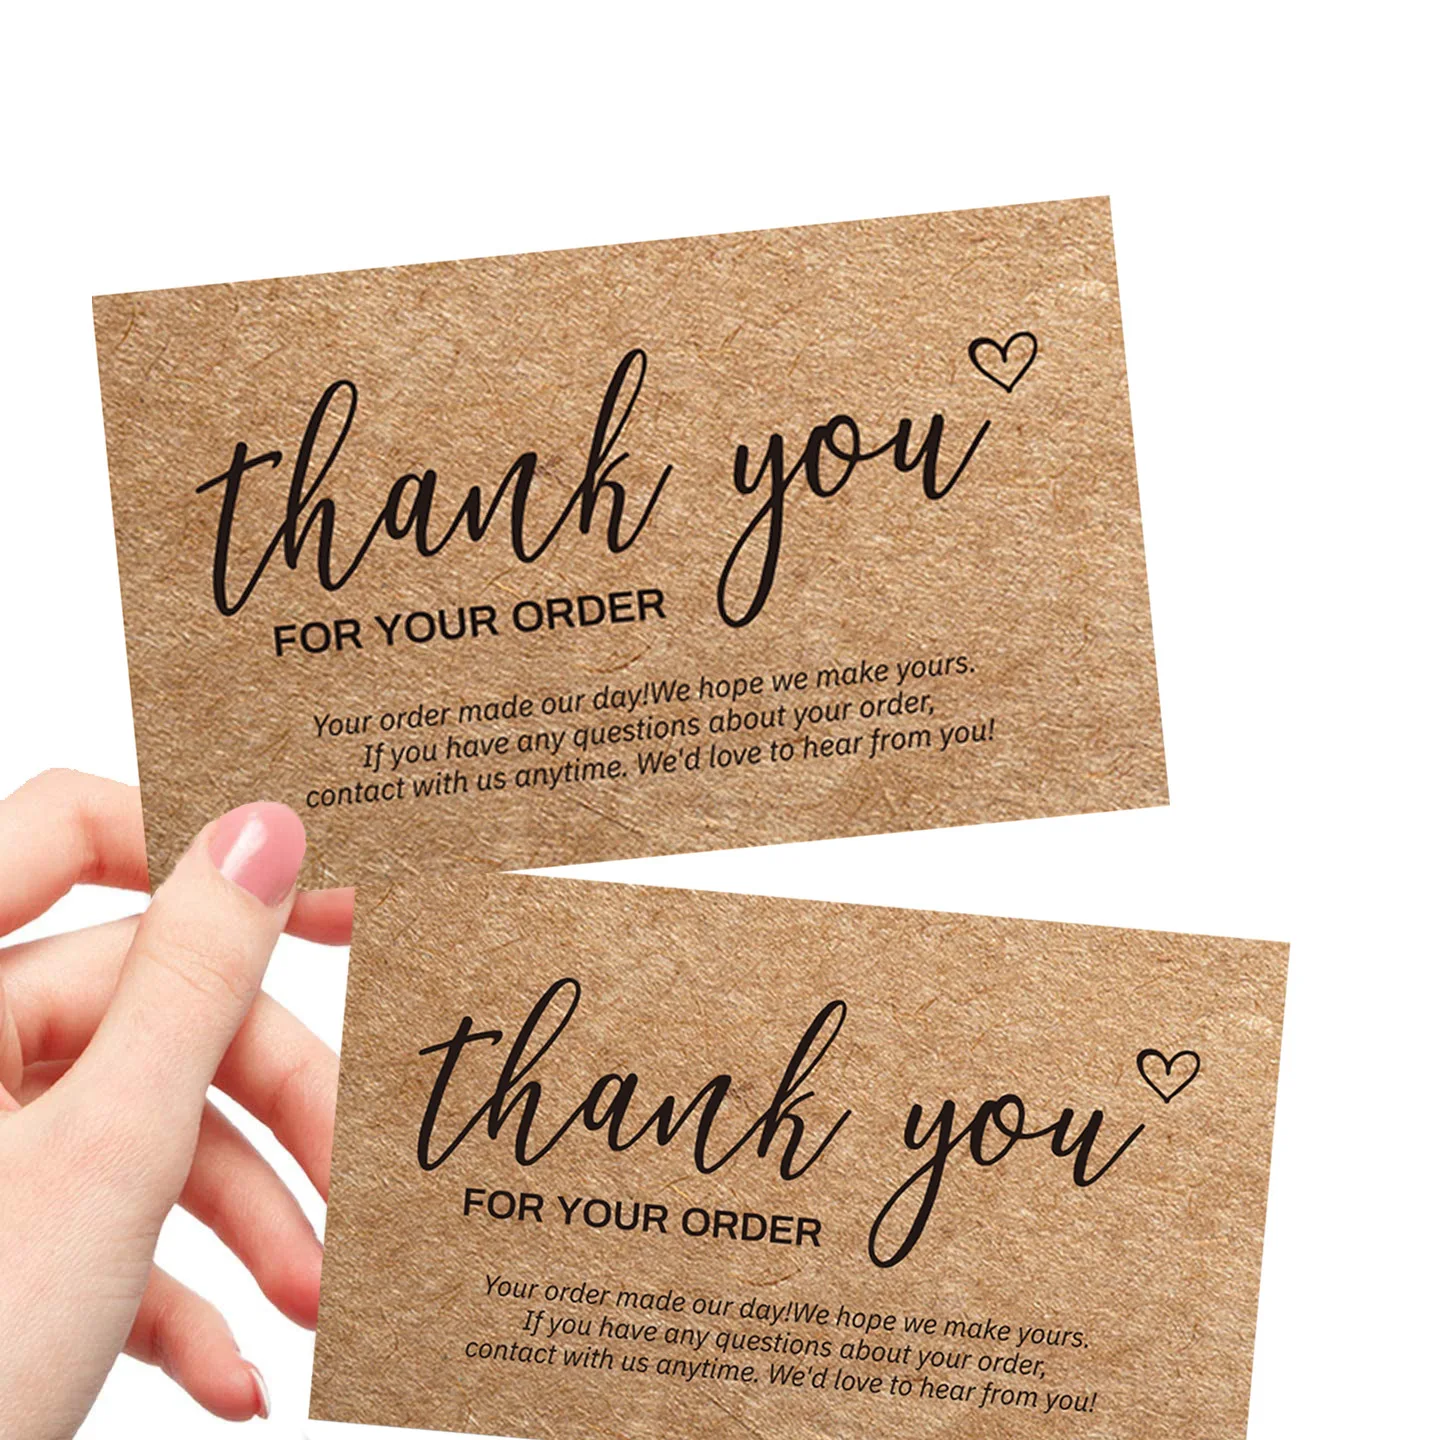 

30Pcs Kraft Paper Card Greeting Tags Thank You for Your Order for Small Shop Gift DIY Crafts Decoration Card for Small Business